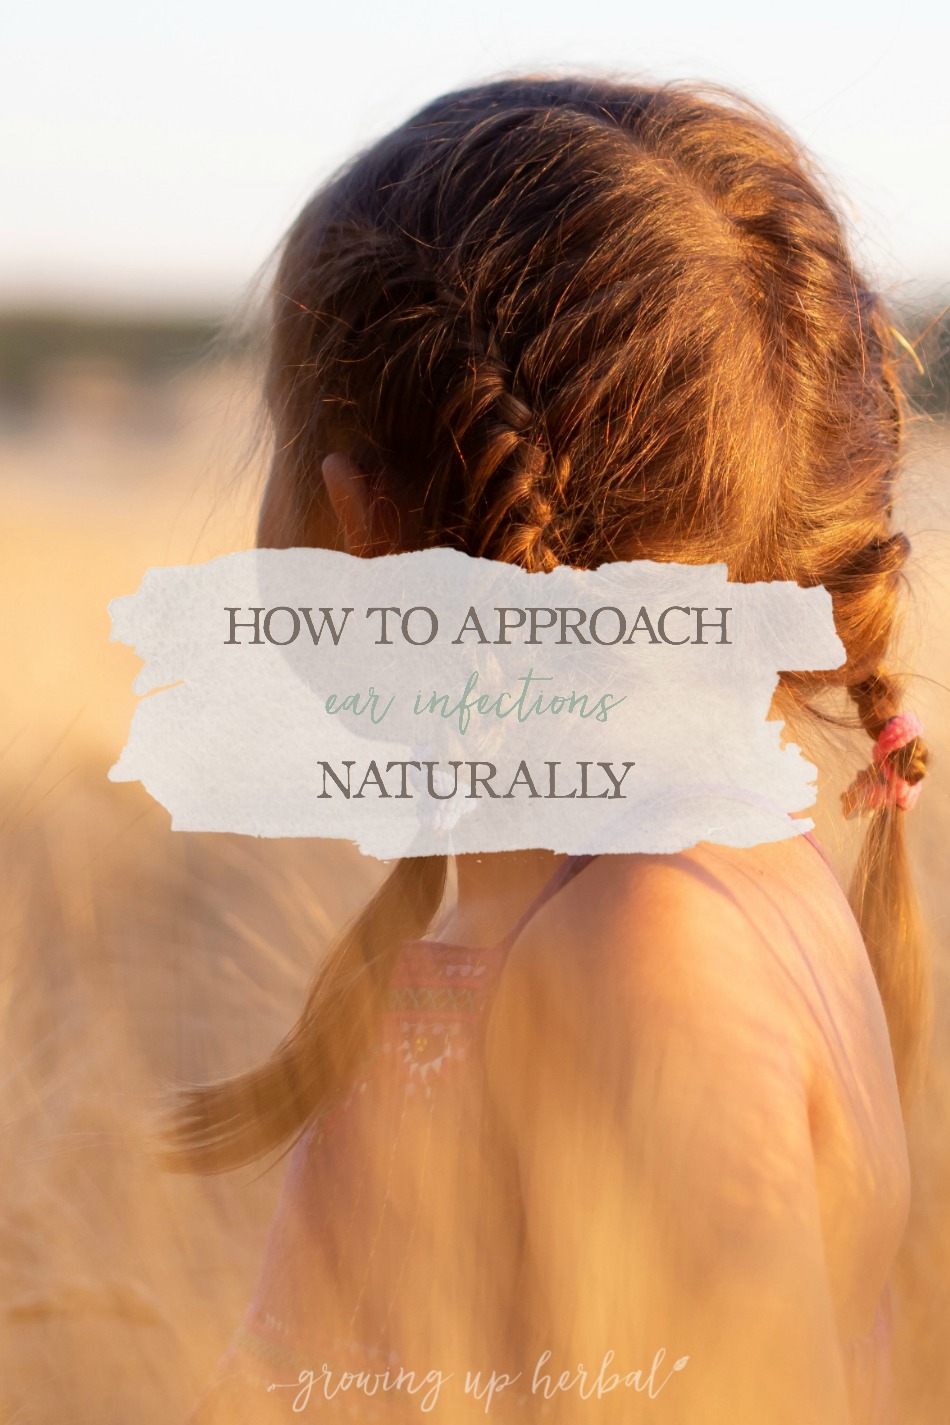 How To Approach Ear Infections Naturally | Growing Up Herbal | Curious how to approach ear infections naturally? Learn how herbs, essential oils, and other natural products can come to your aid and support the body.